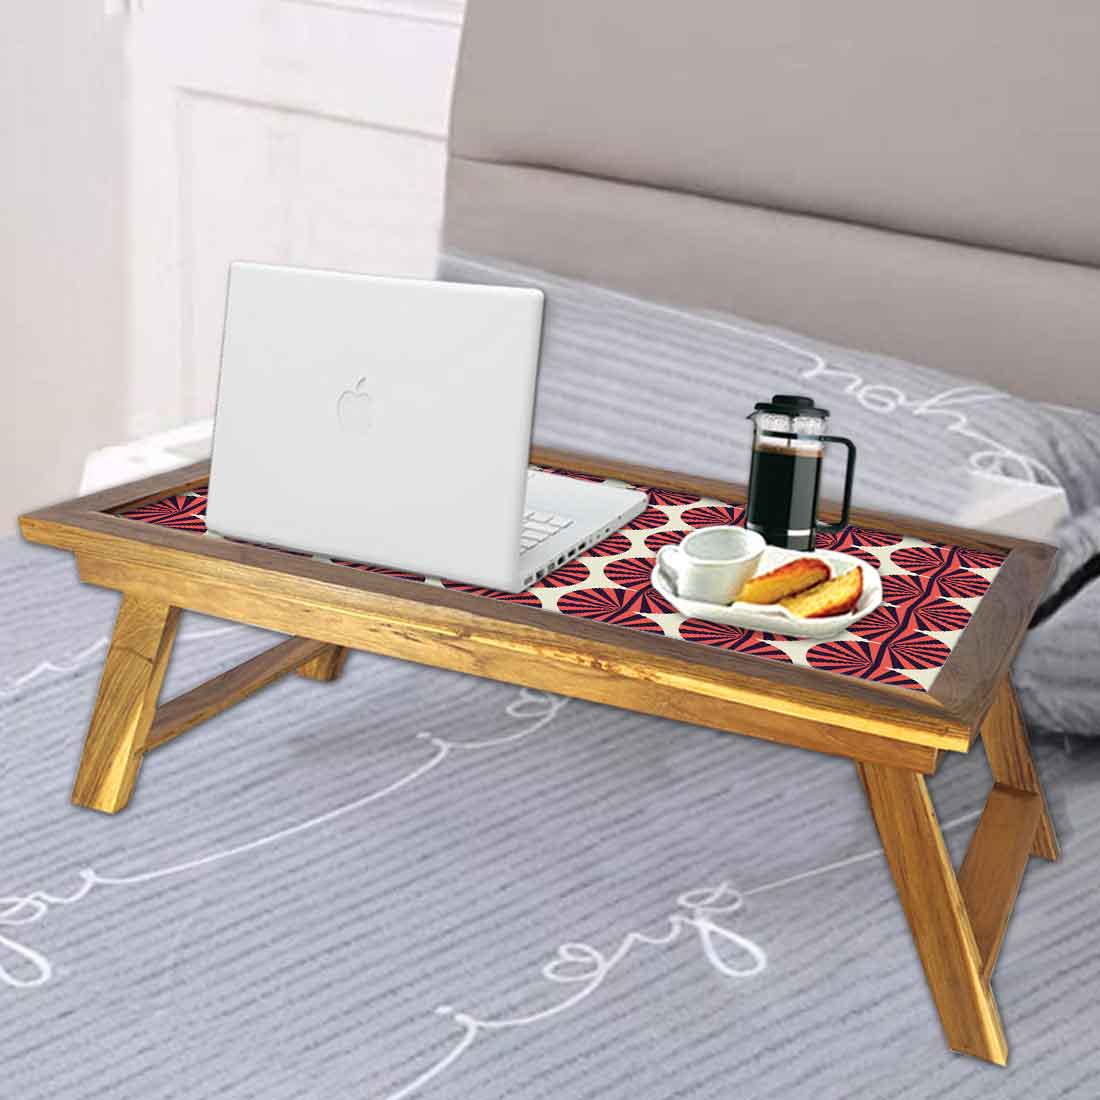 Folding Printed Breakfast Bed Tray Table With Legs - Brown Retro Nutcase